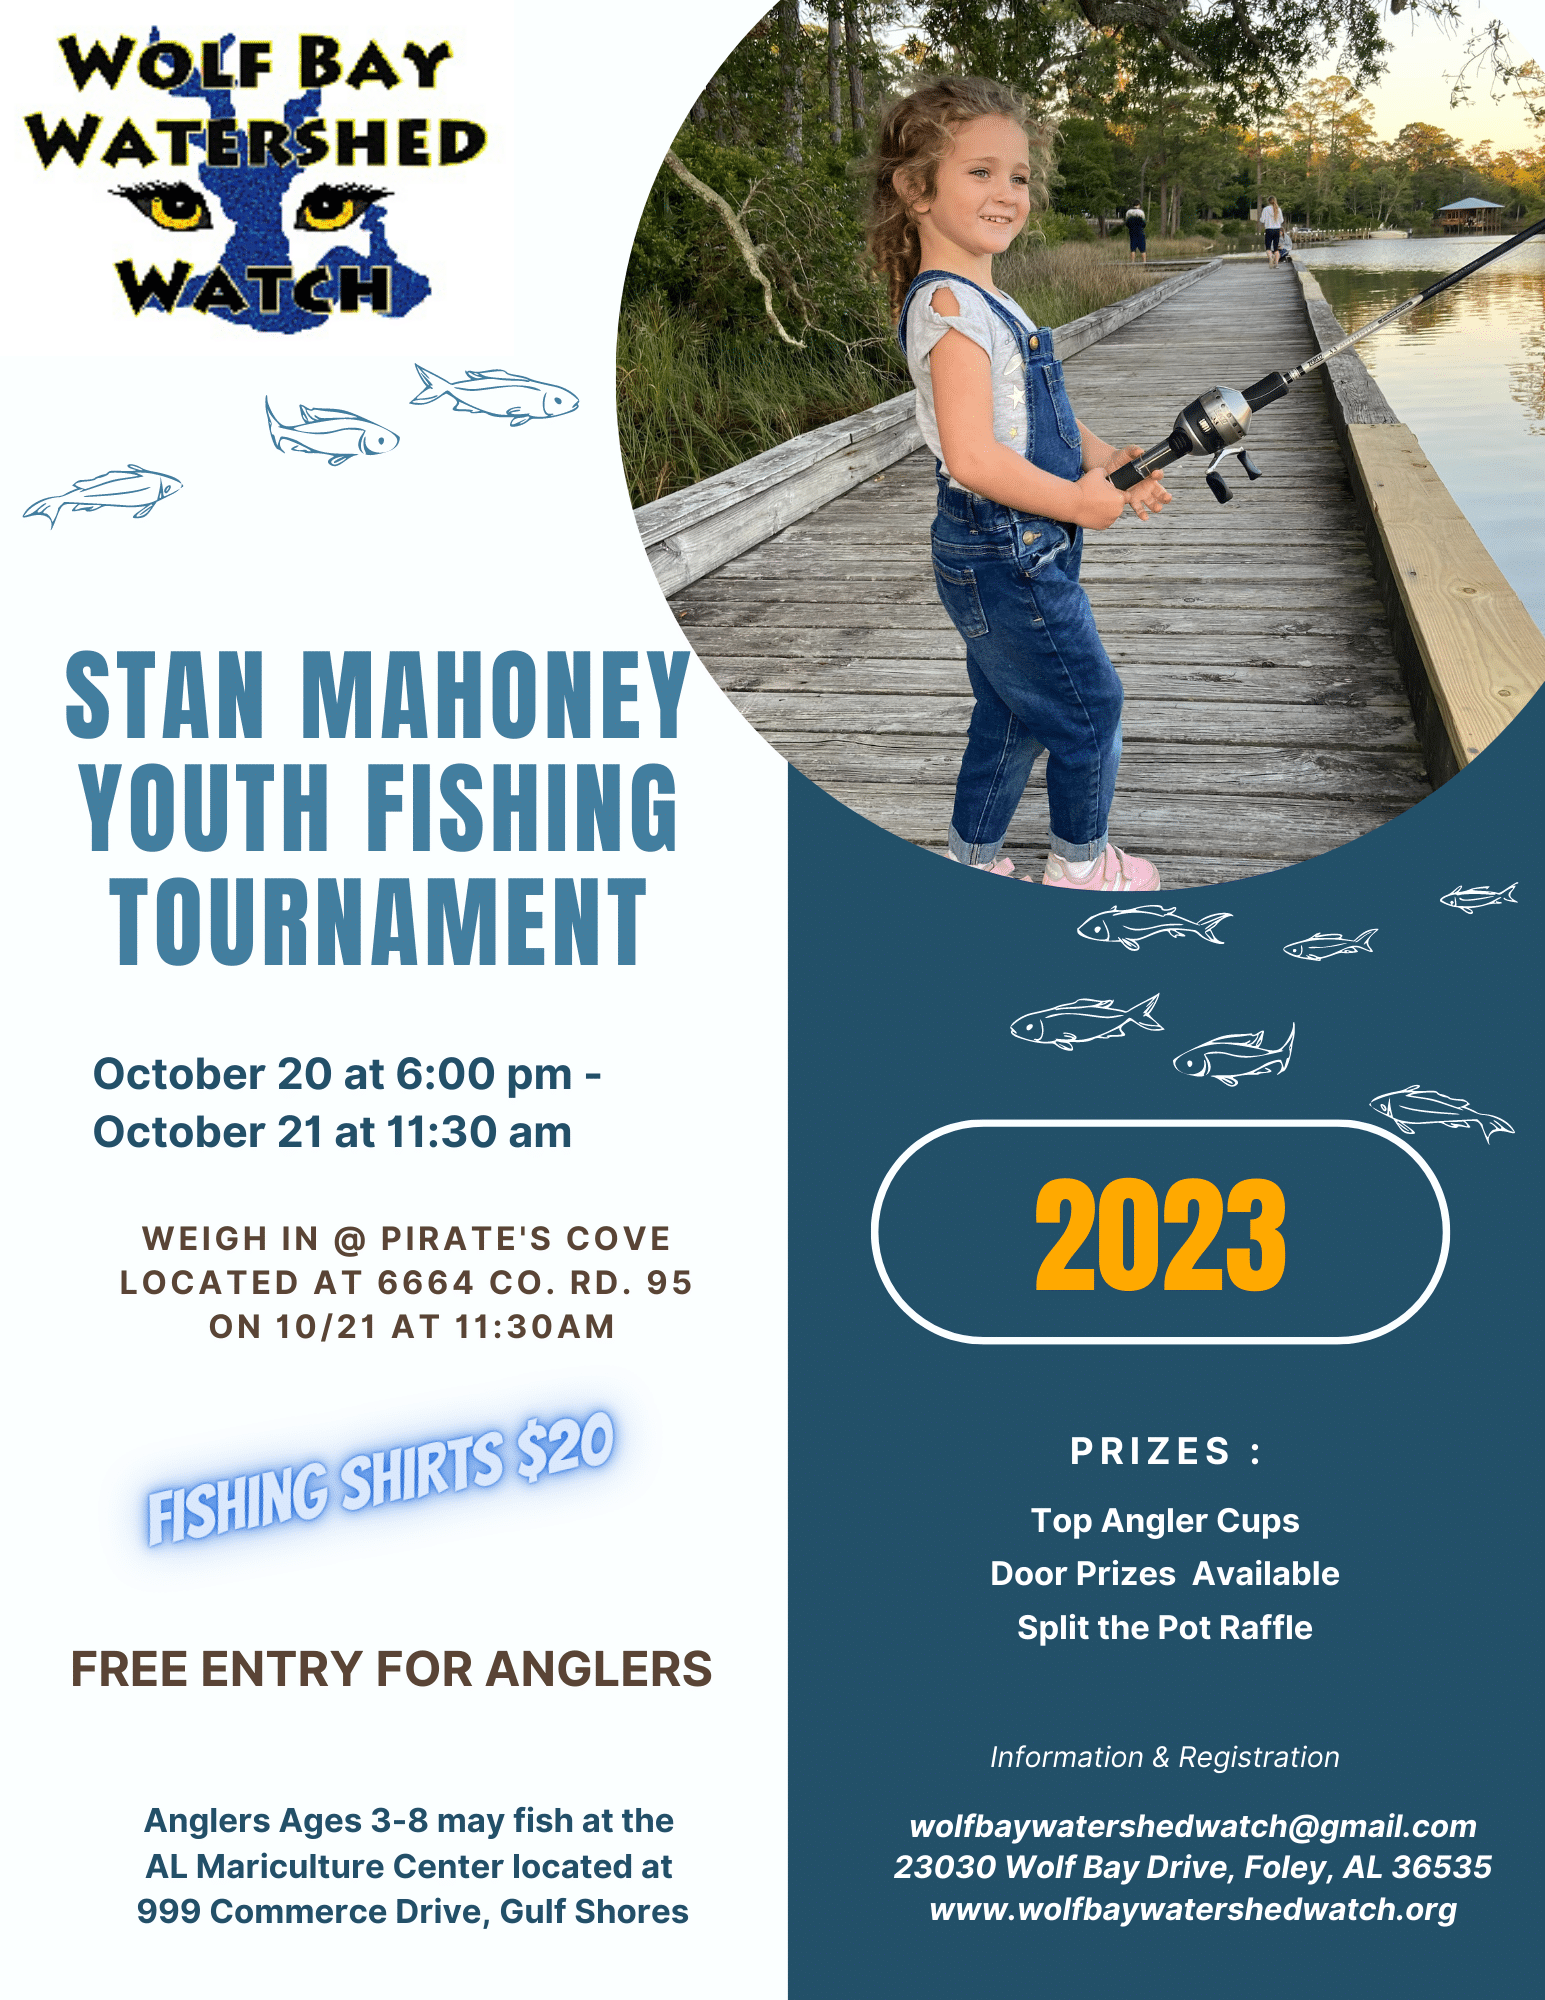 Youth Fishing Tournament - Wolf Bay Watershed Watch